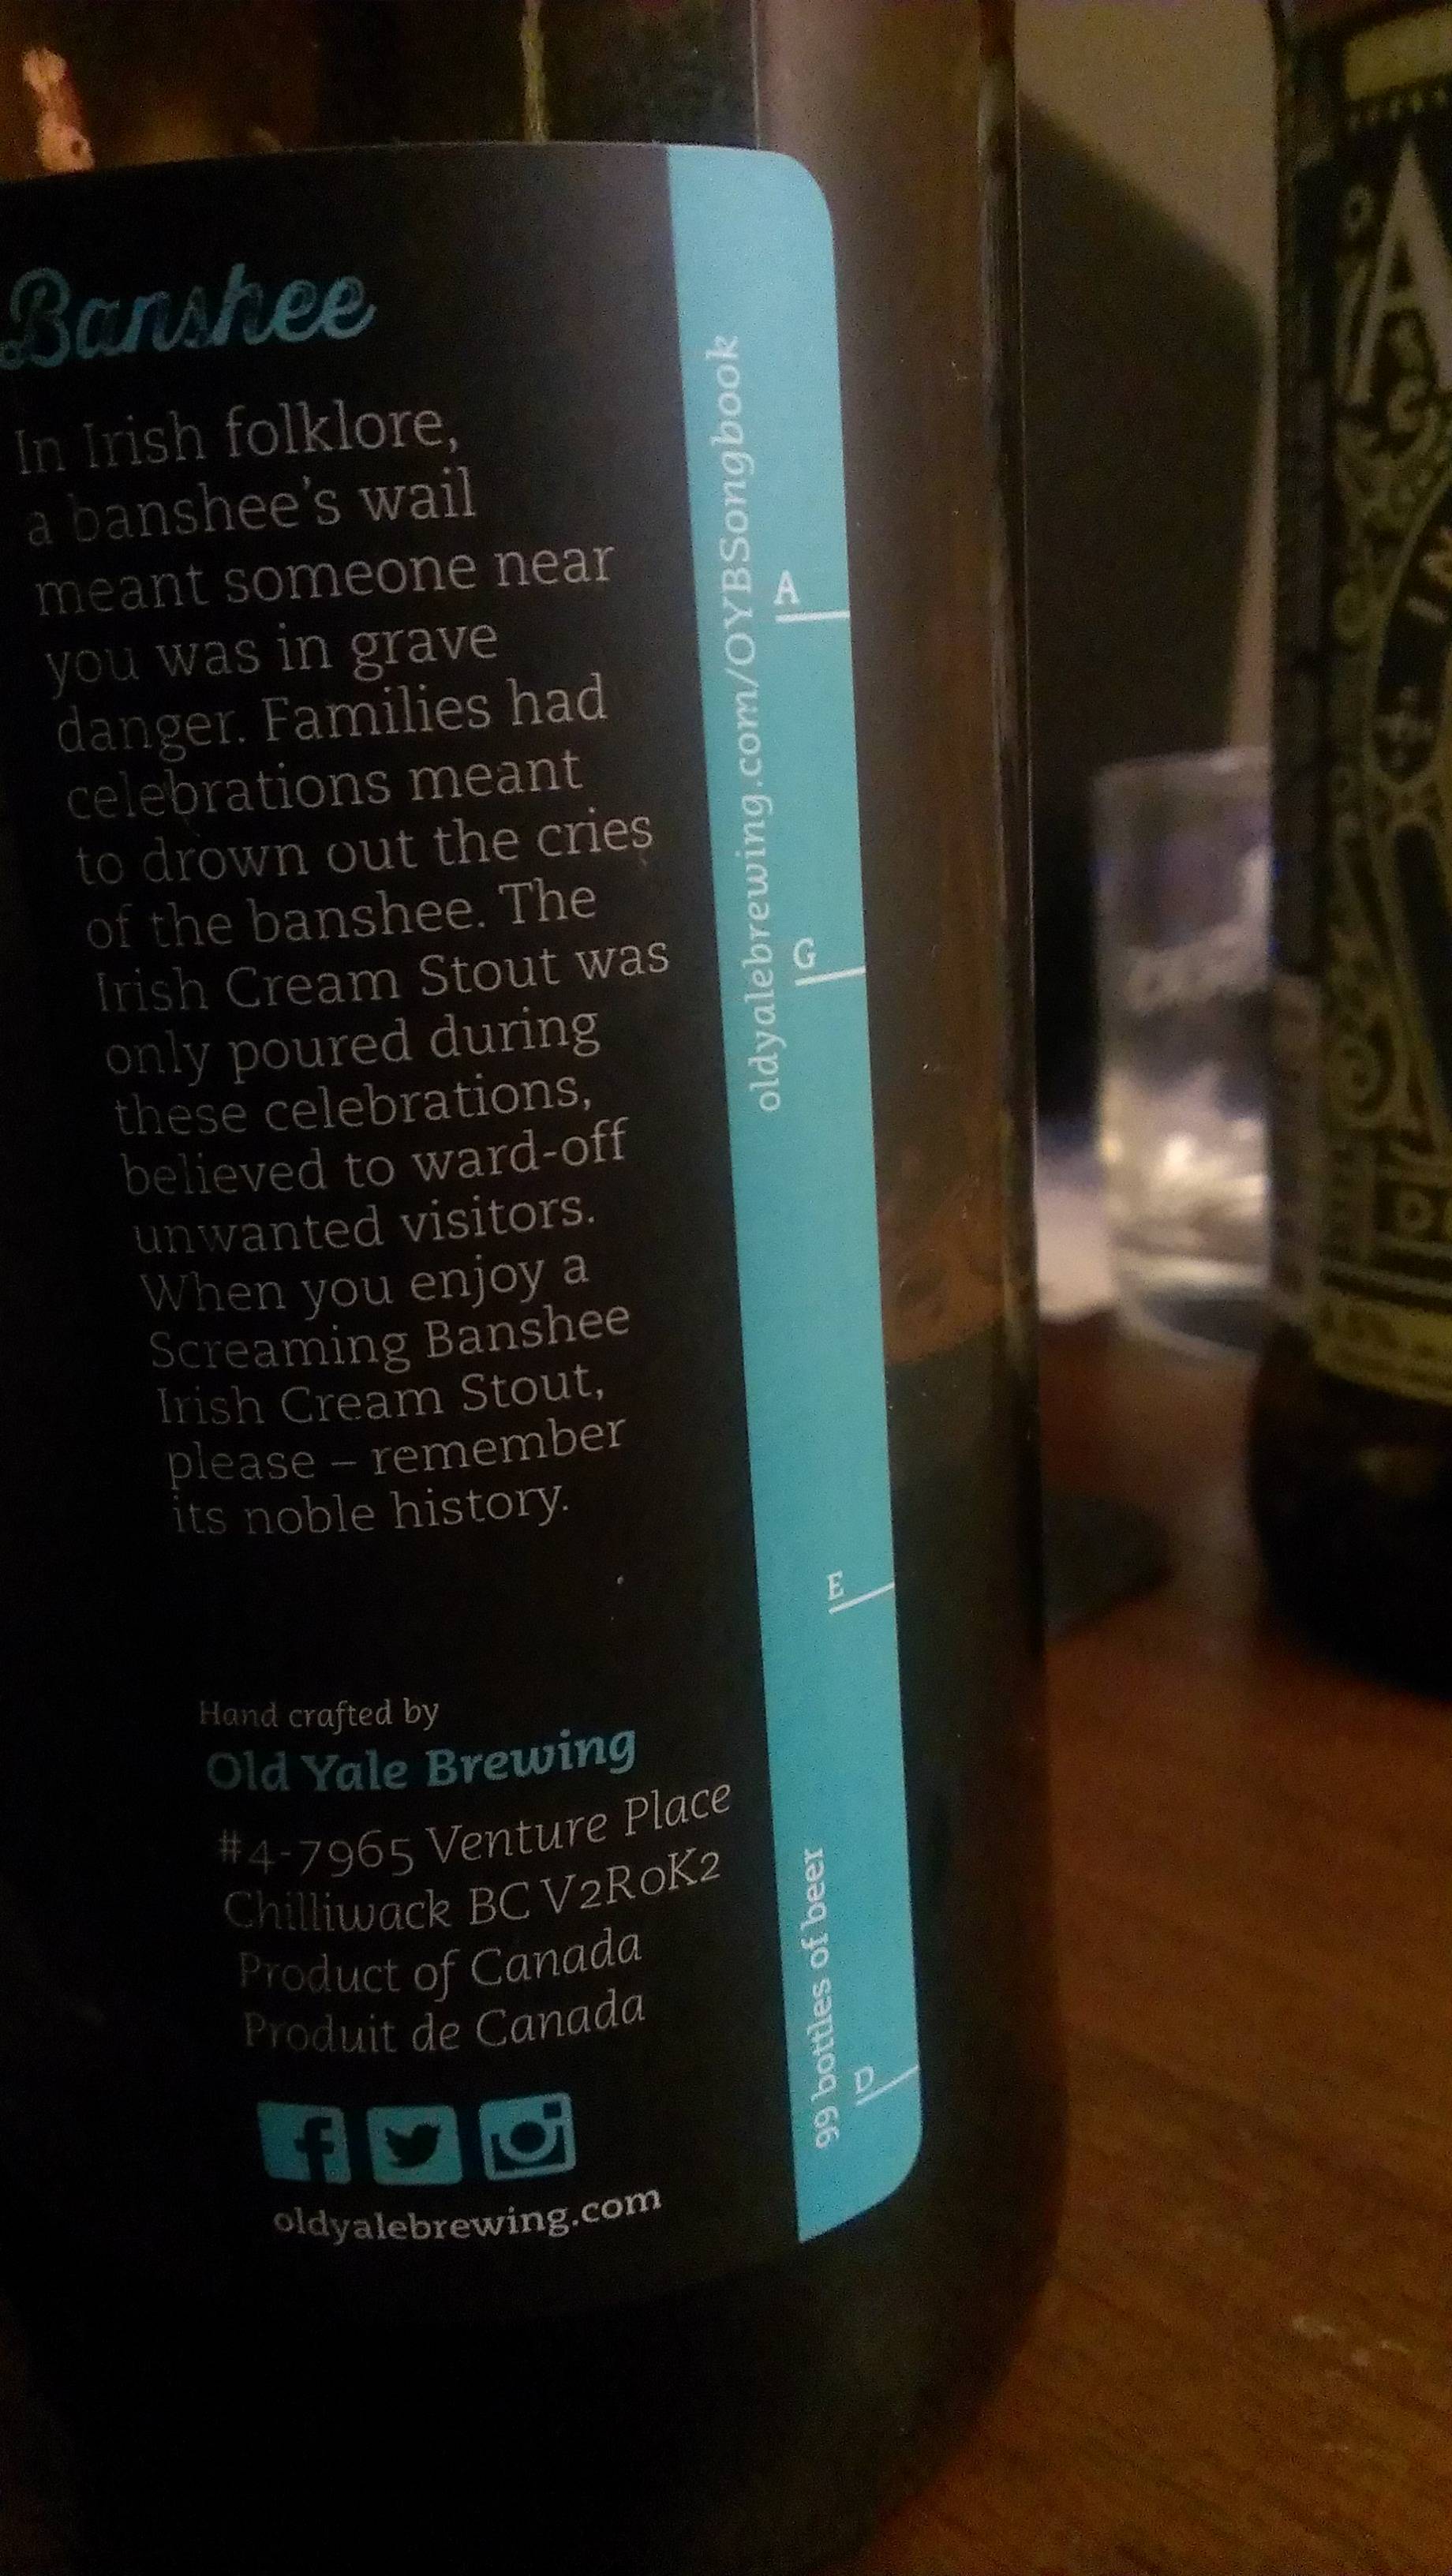 The label on my beer tells you what note you'll hear when you blow 

over it, based on how full the bottle is.